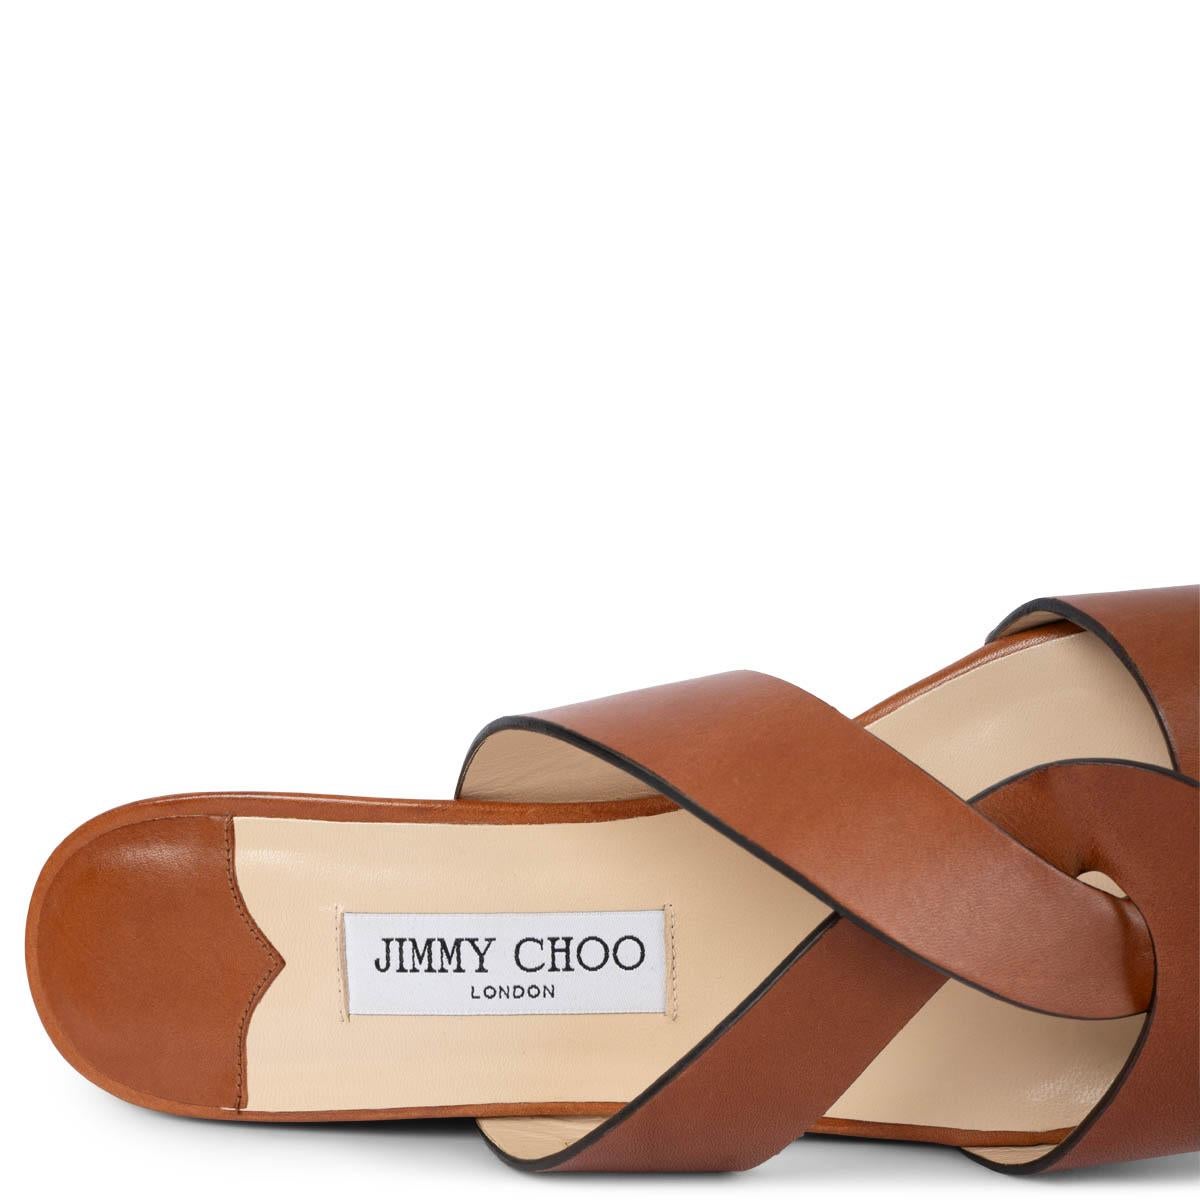 JIMMY CHOO cognac leather & cork ATIA 75 Wedge Sandals Shoes 40 For Sale 3